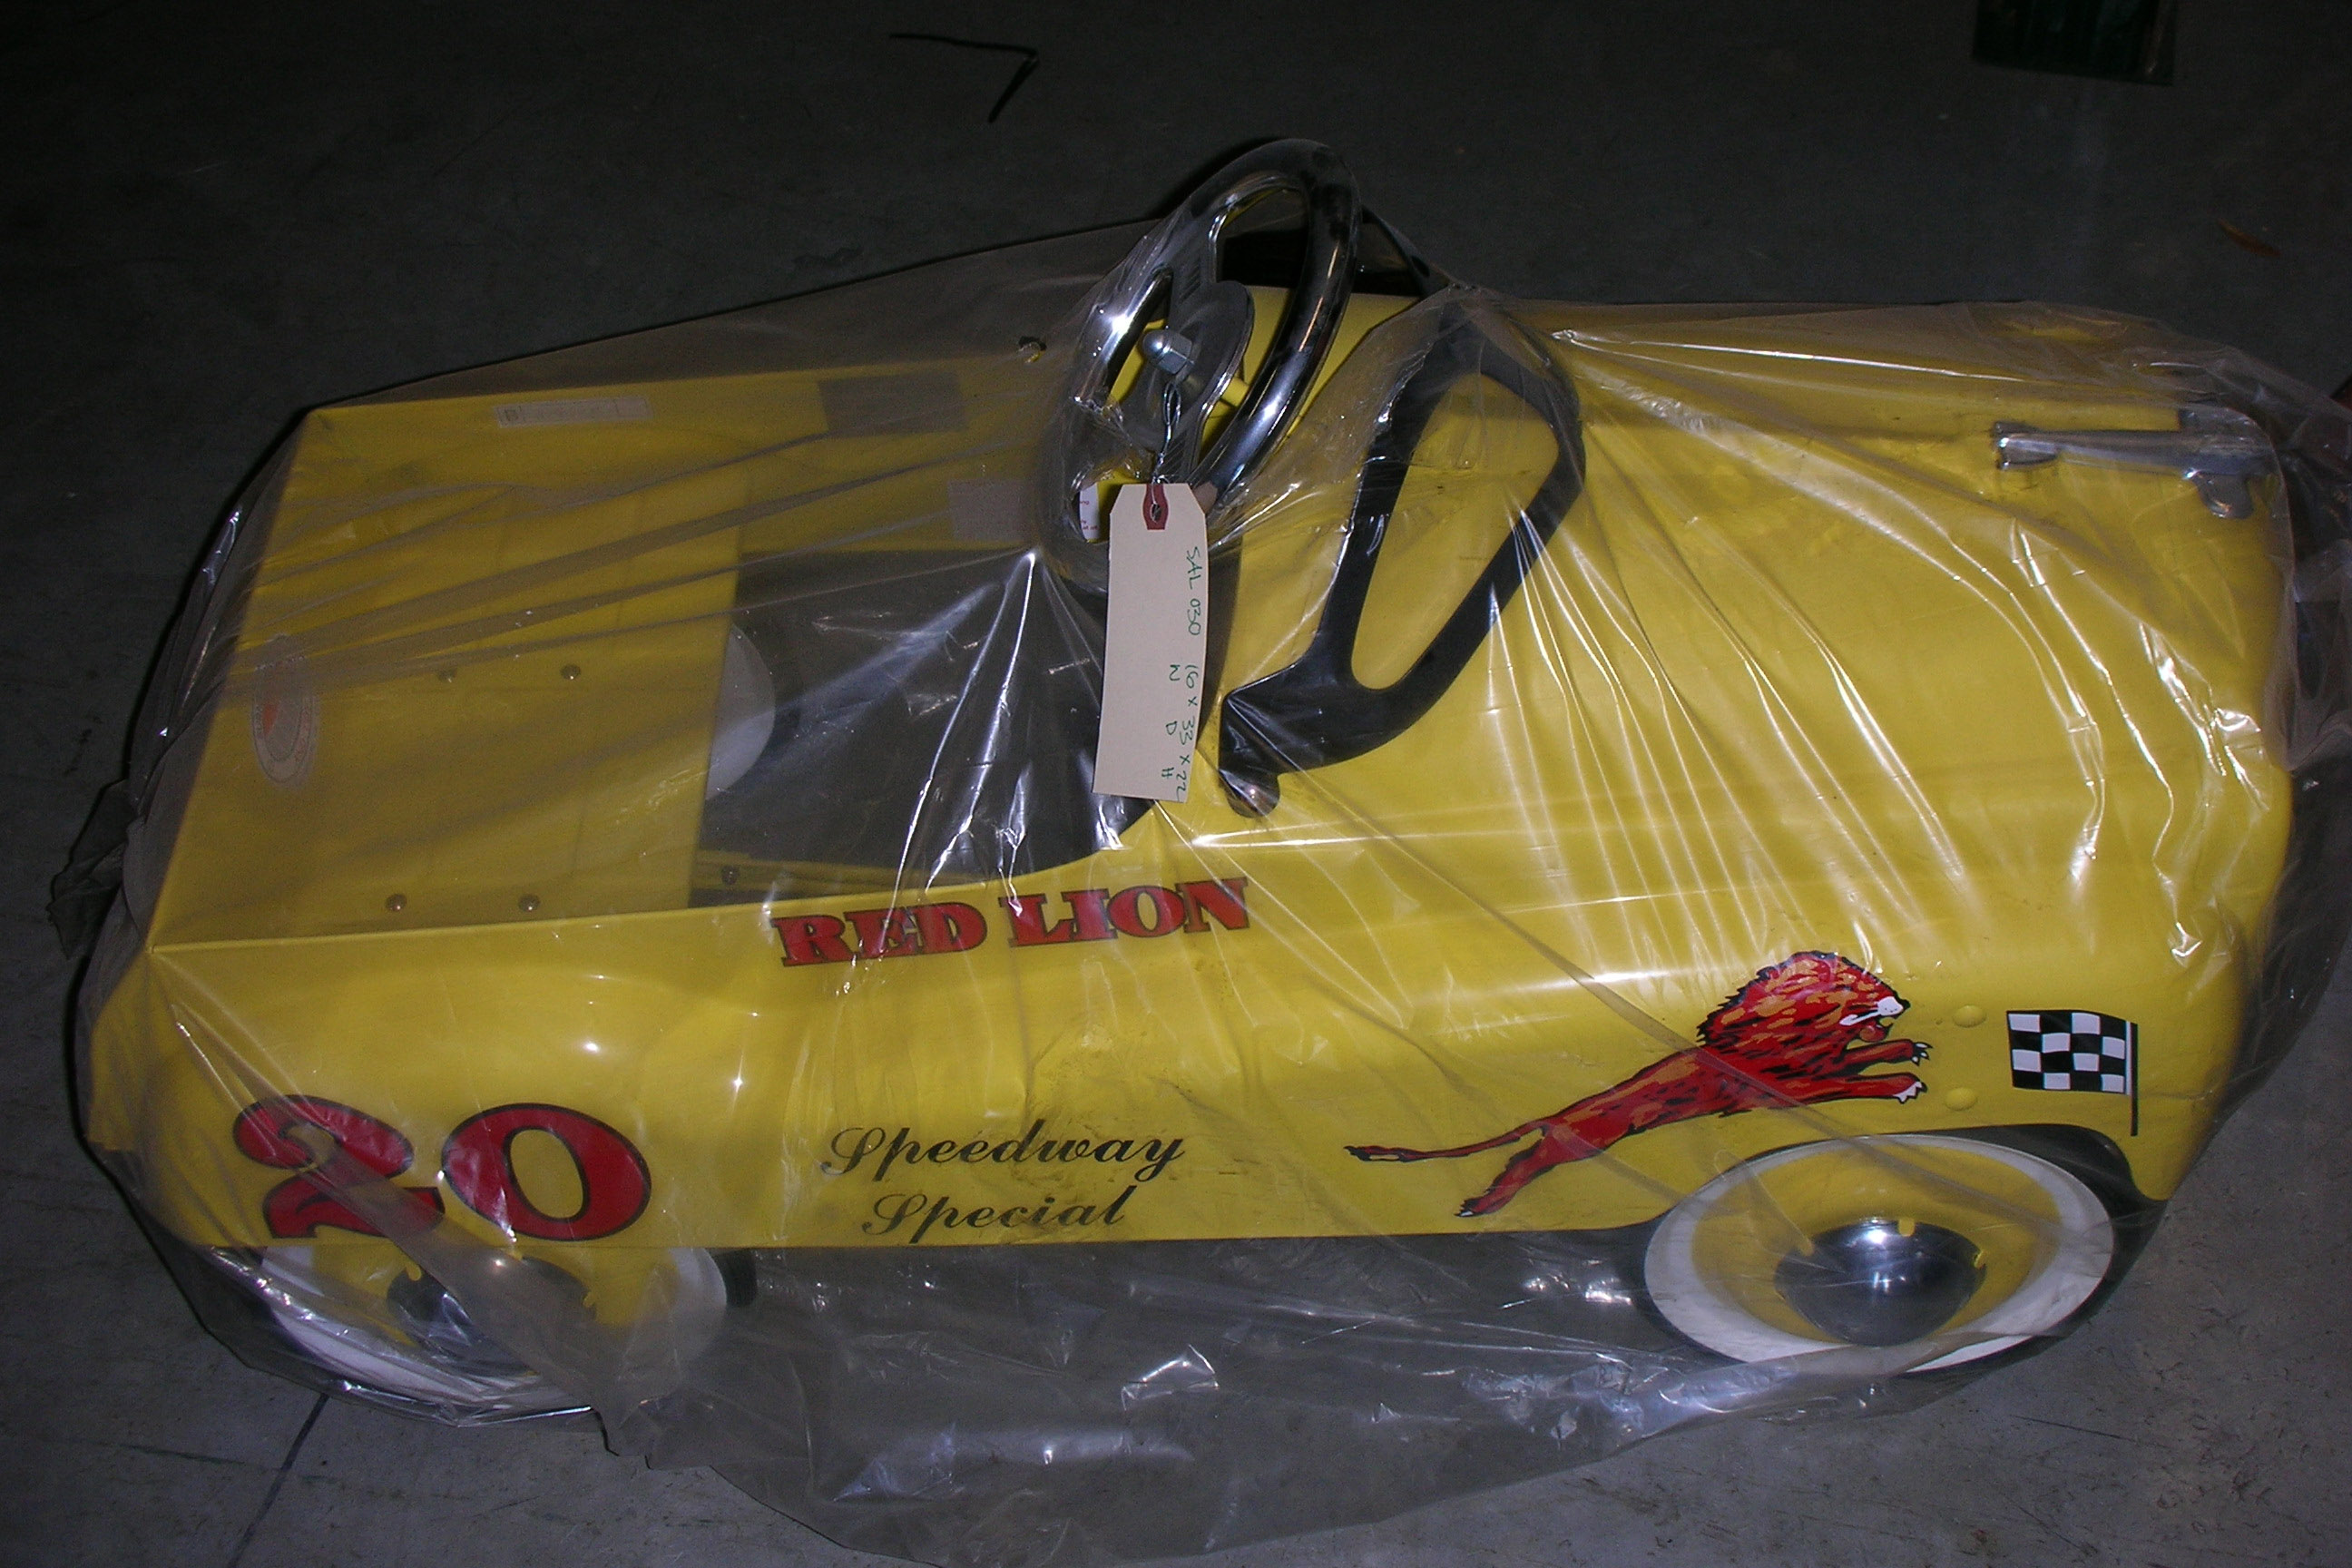 1st Image of a N/A RED LION SPEEDWAY SPECIAL PEDAL CAR